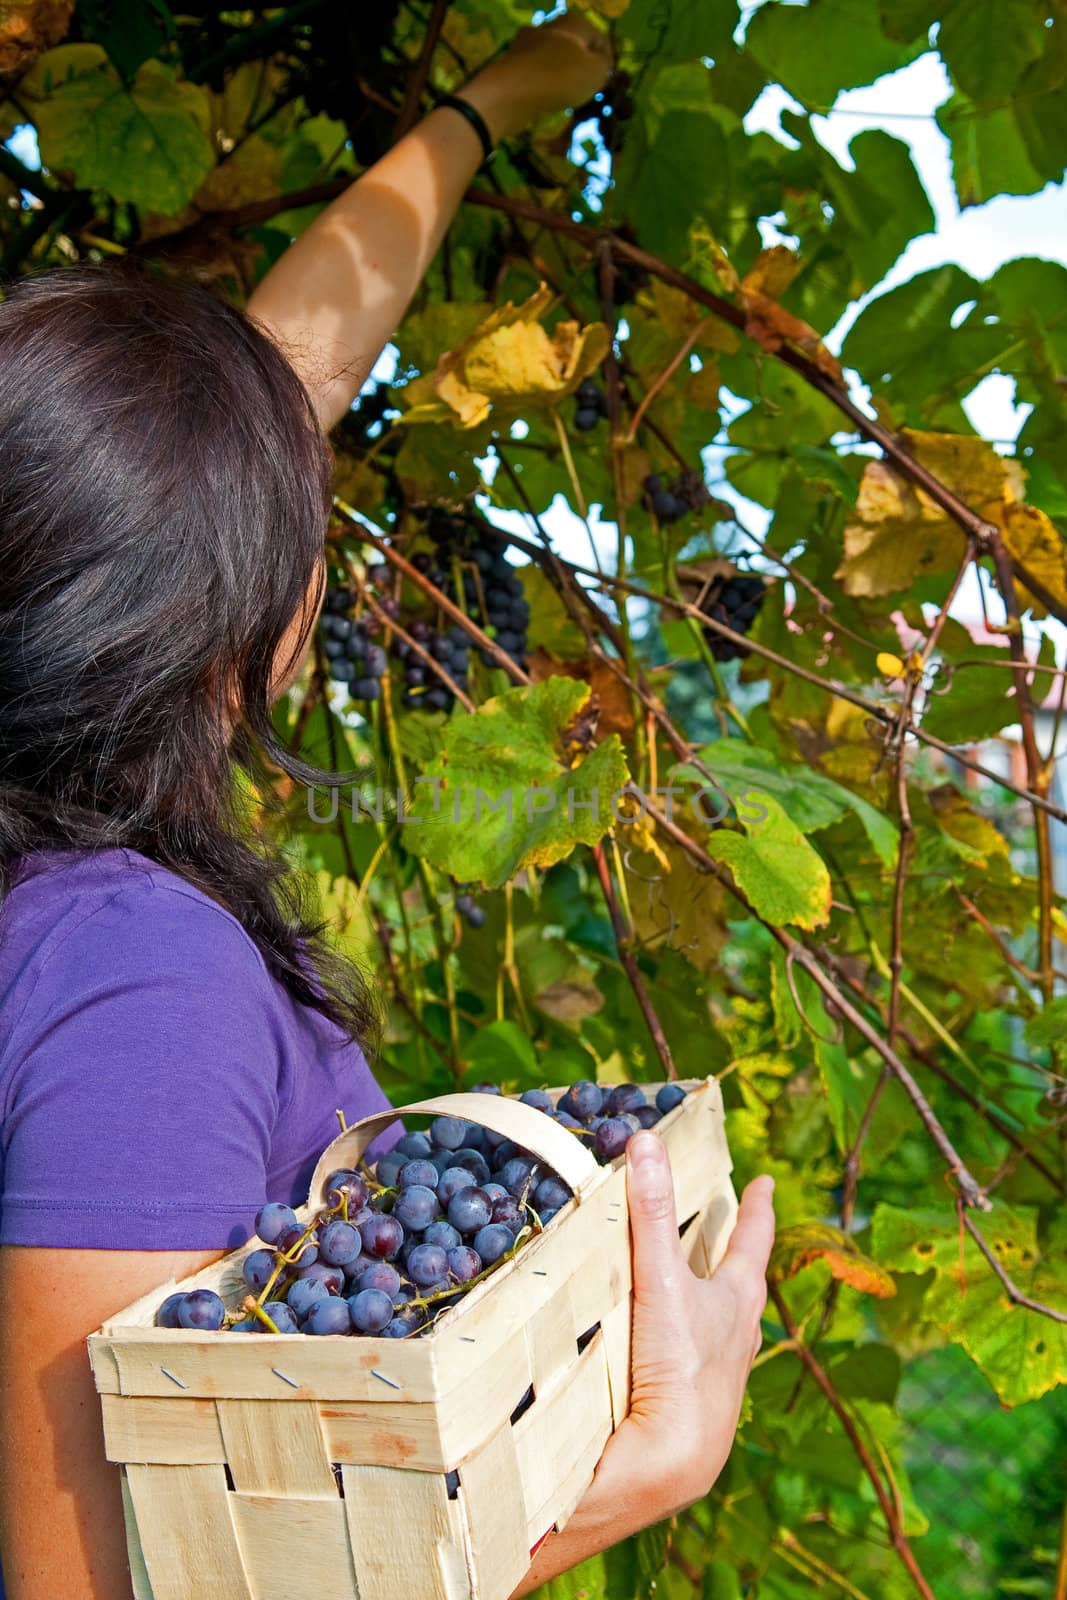 A young girl grape picking